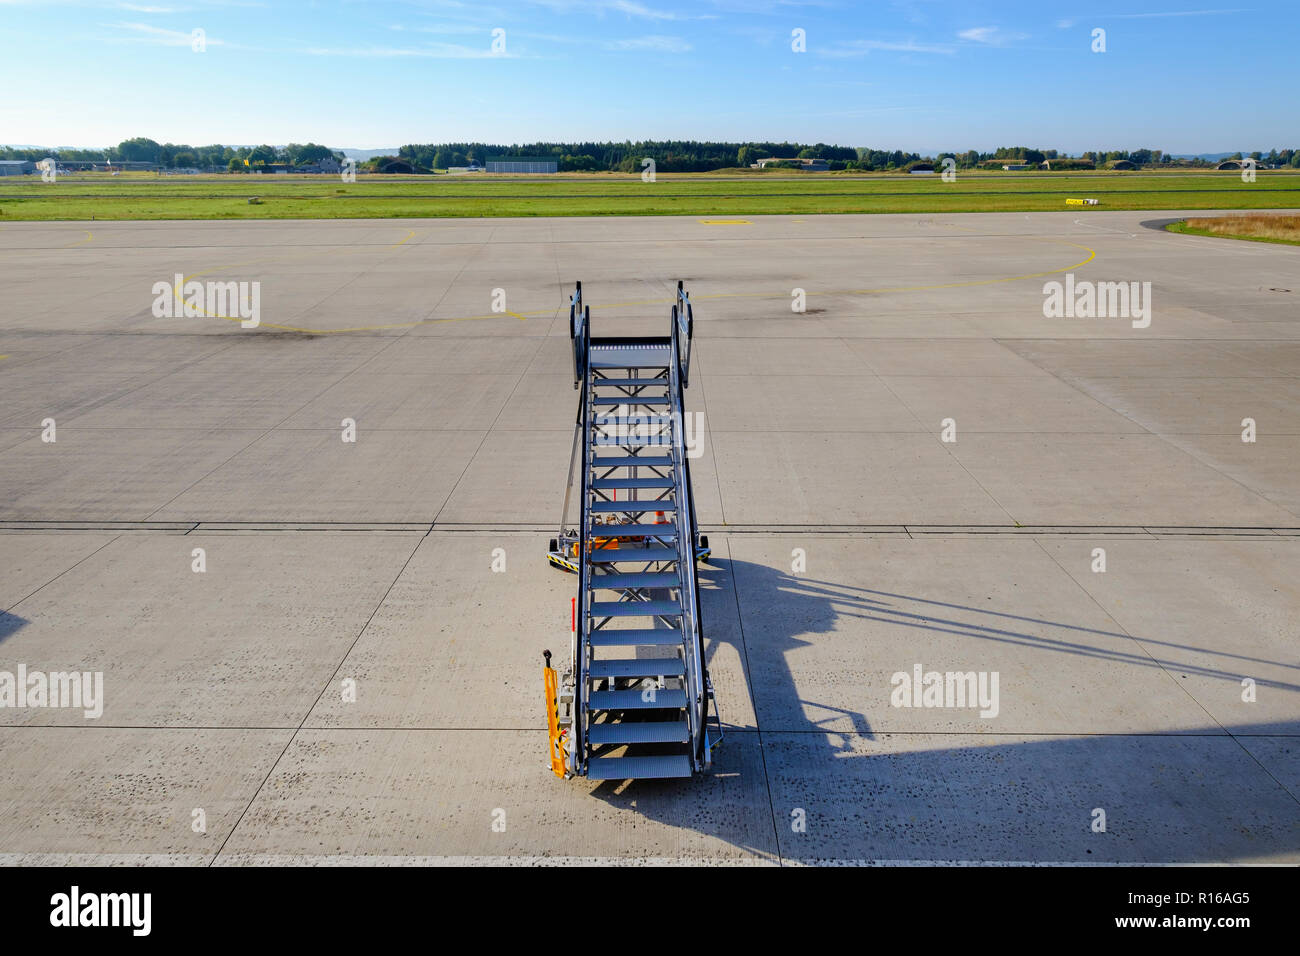 Passenger Stairs High Resolution Stock Photography and Images - Alamy